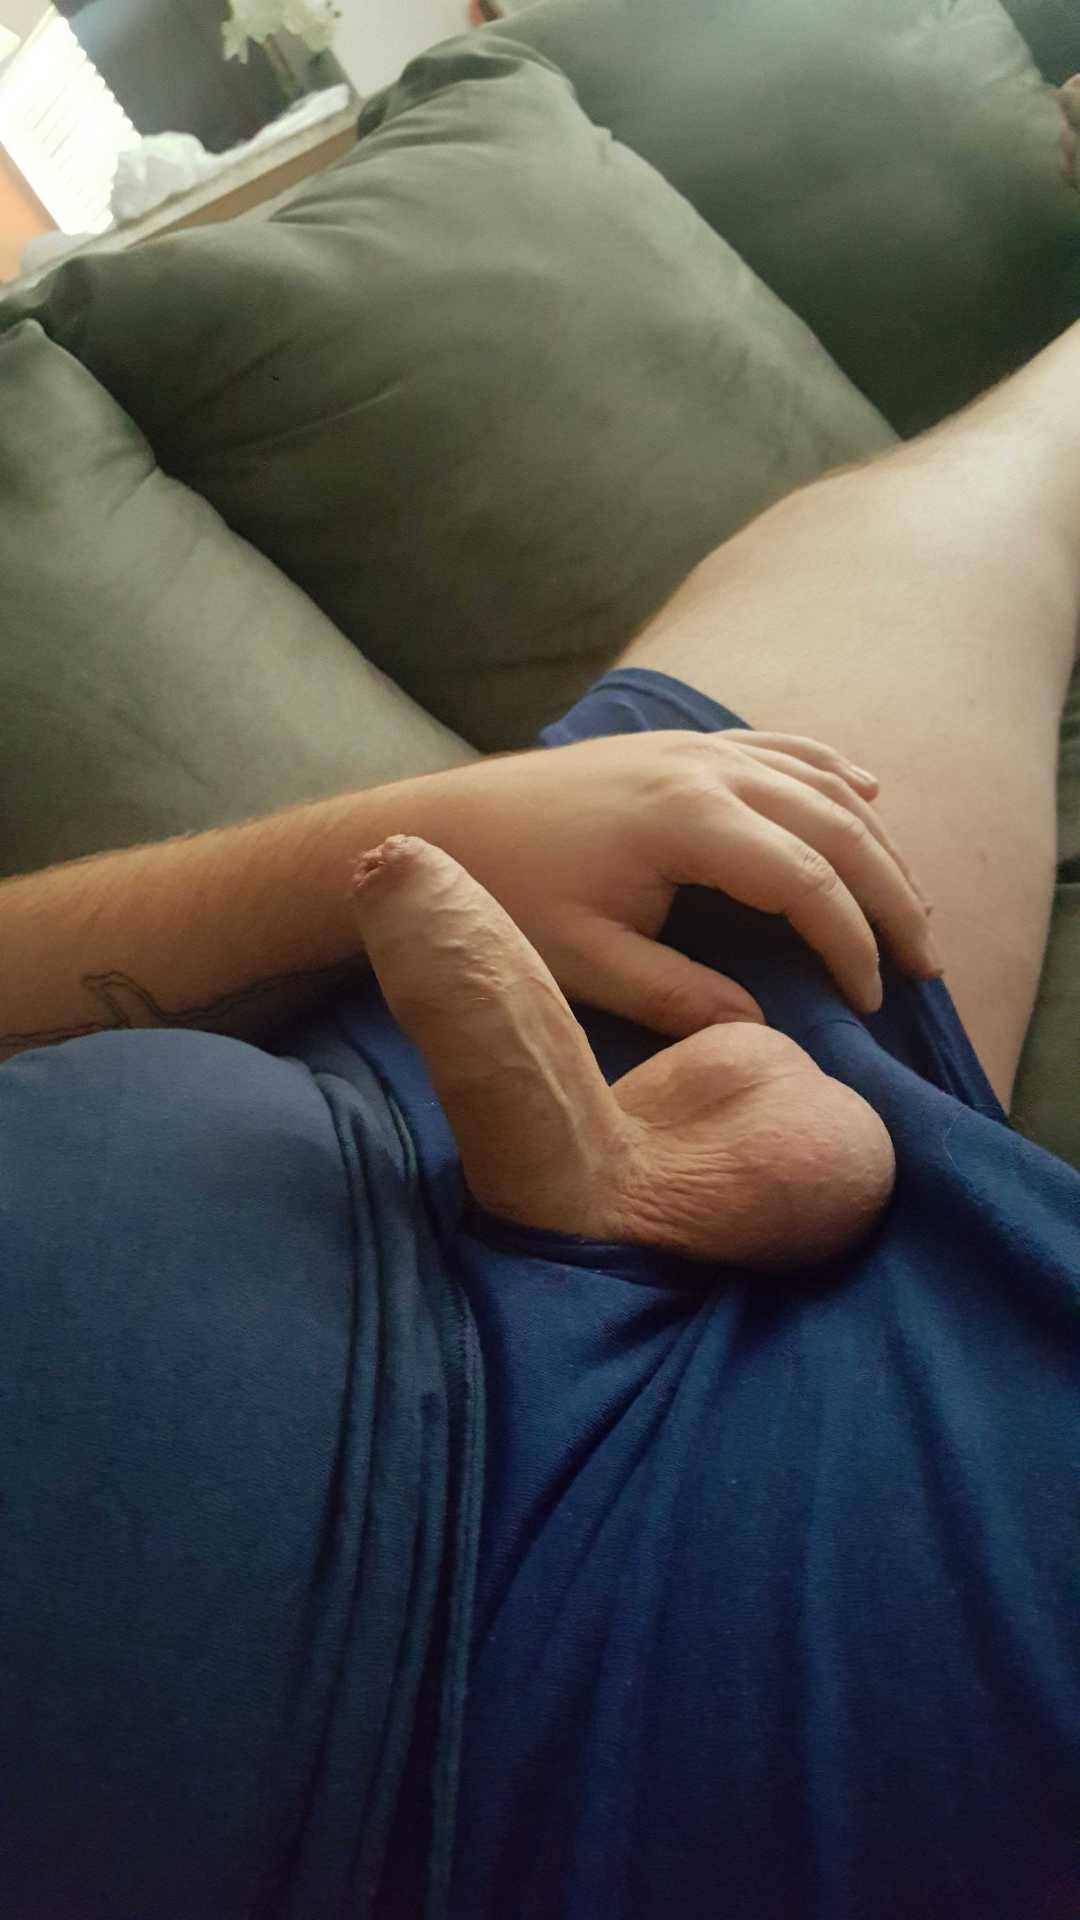 nbtdakid24:  Just hanging out on a lazy Saturday #uncutcock #smoothballs #thickcock